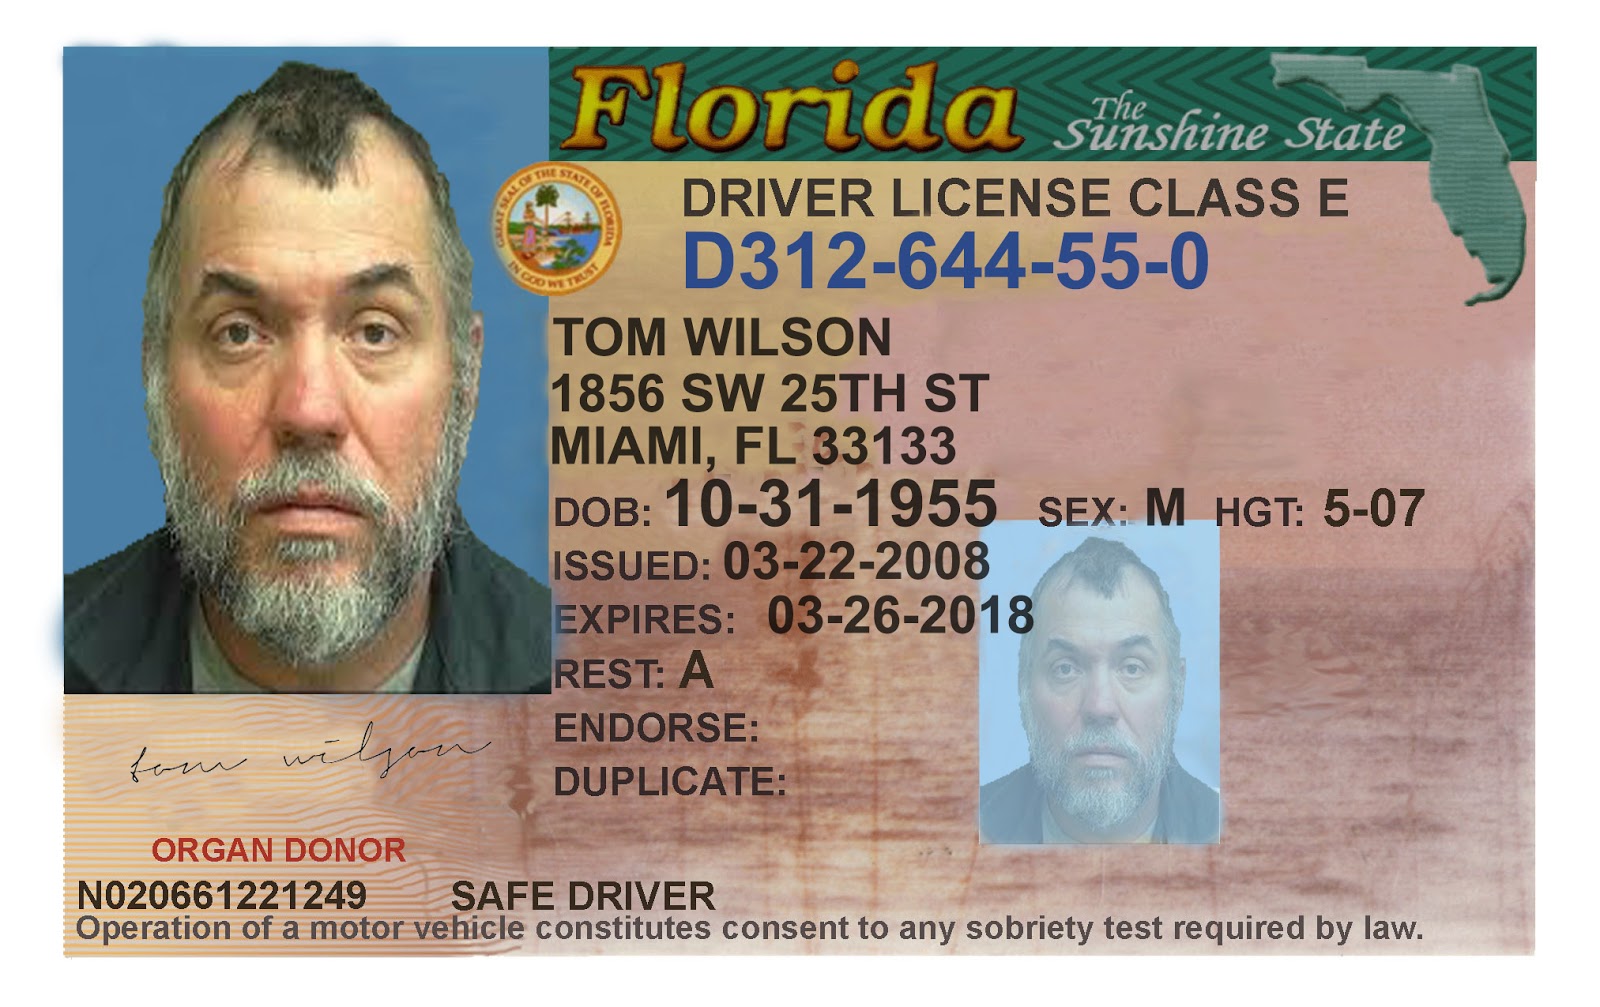 create free drivers license template